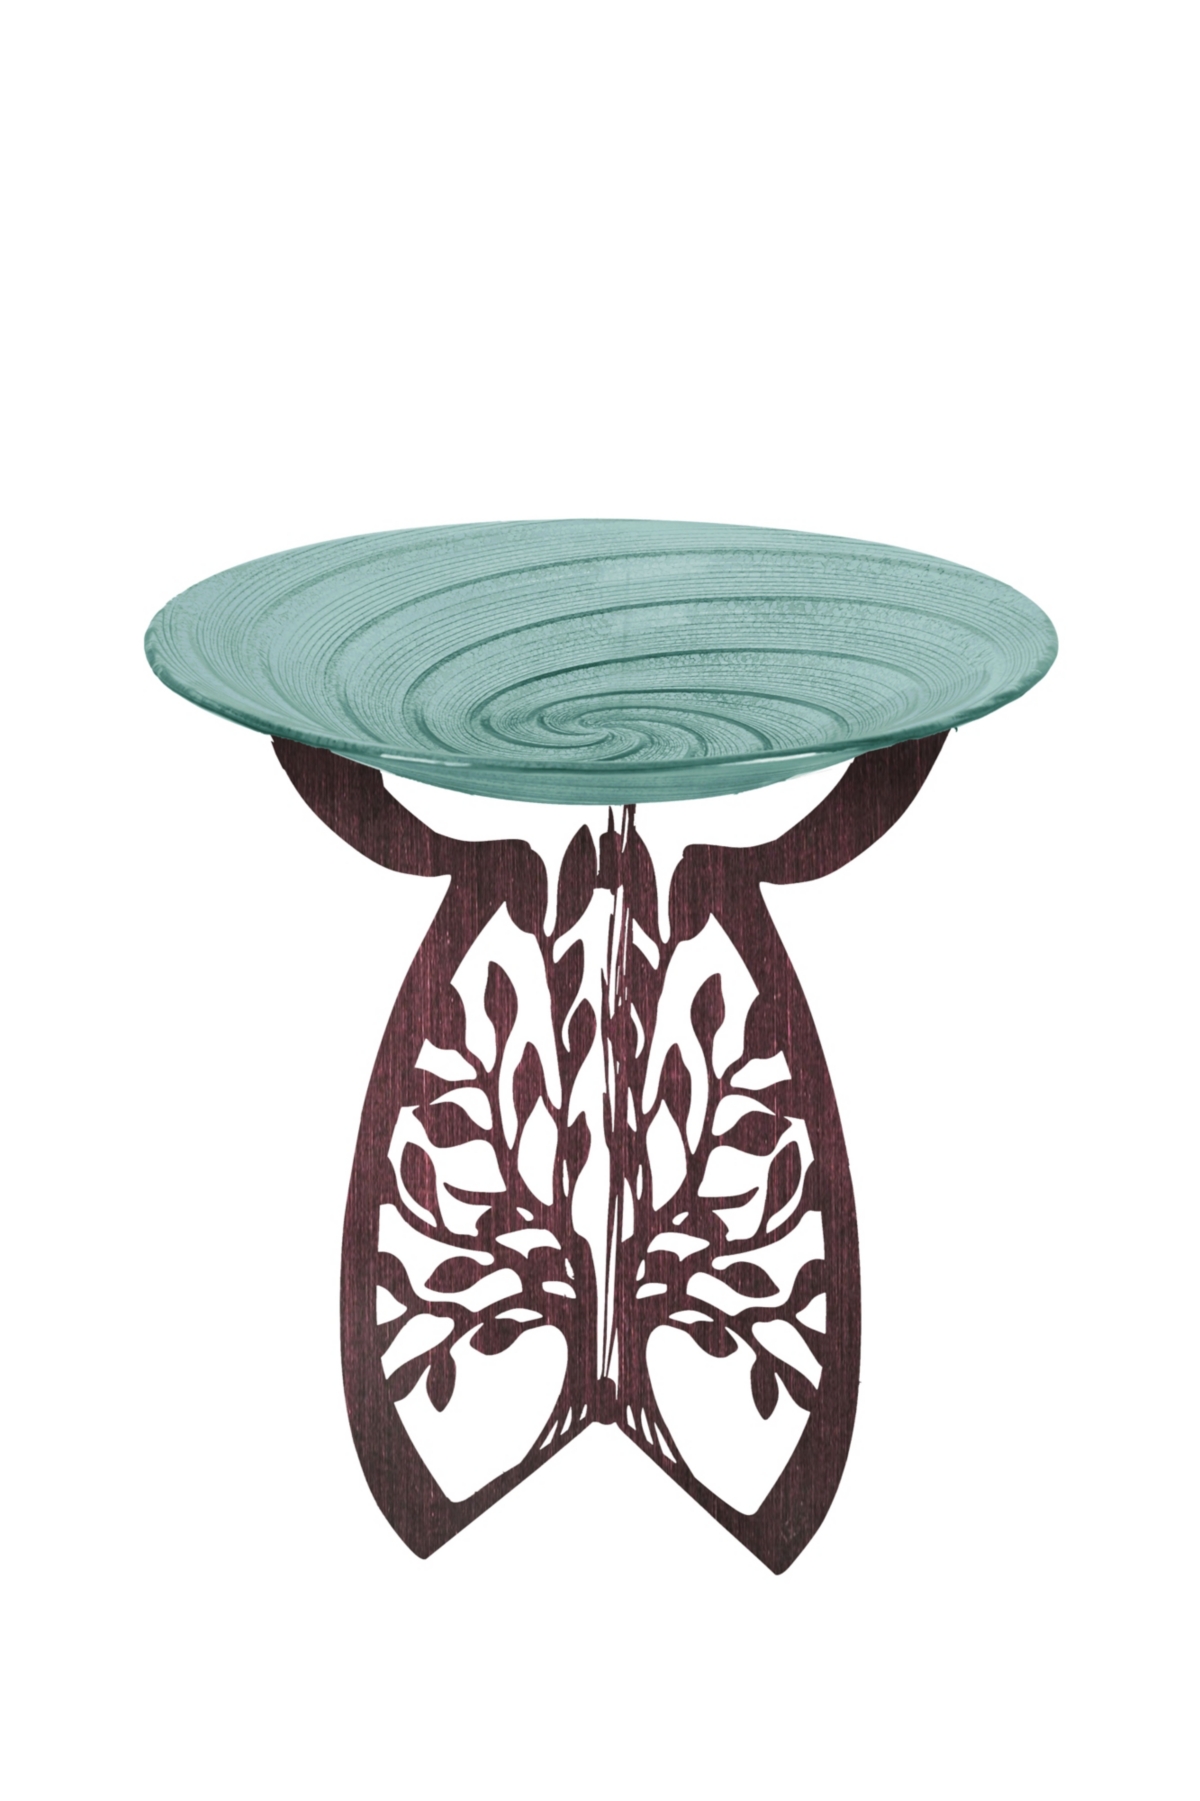 Evergreen Laser Cut Bird Bath Stand And Glass Embossed Bird Bath Set, Tree Of Life In Multicolored